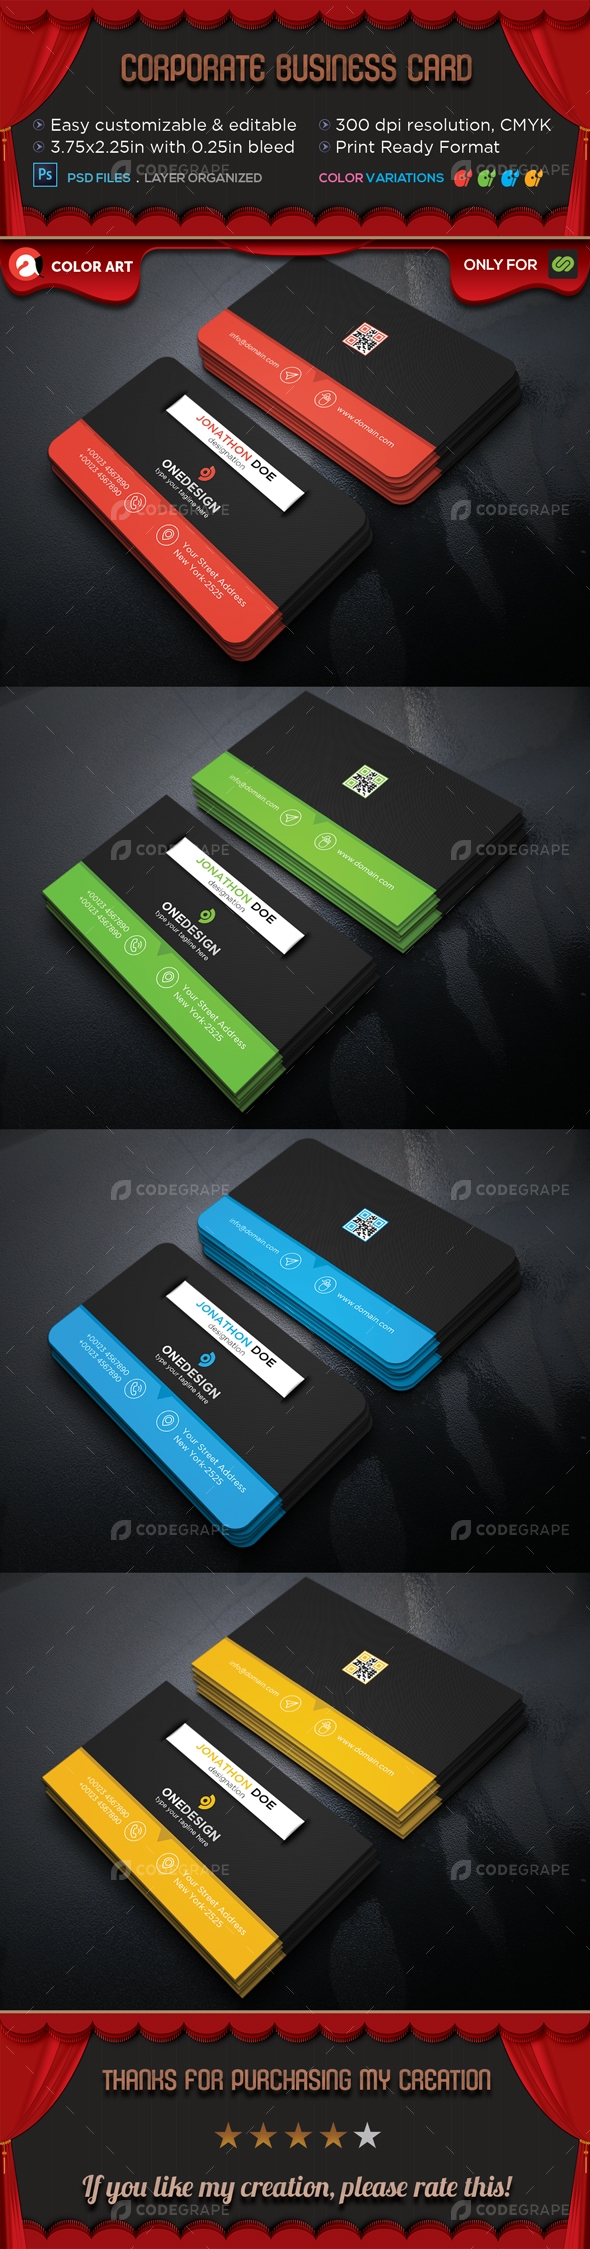 Corporate Business Card V.5